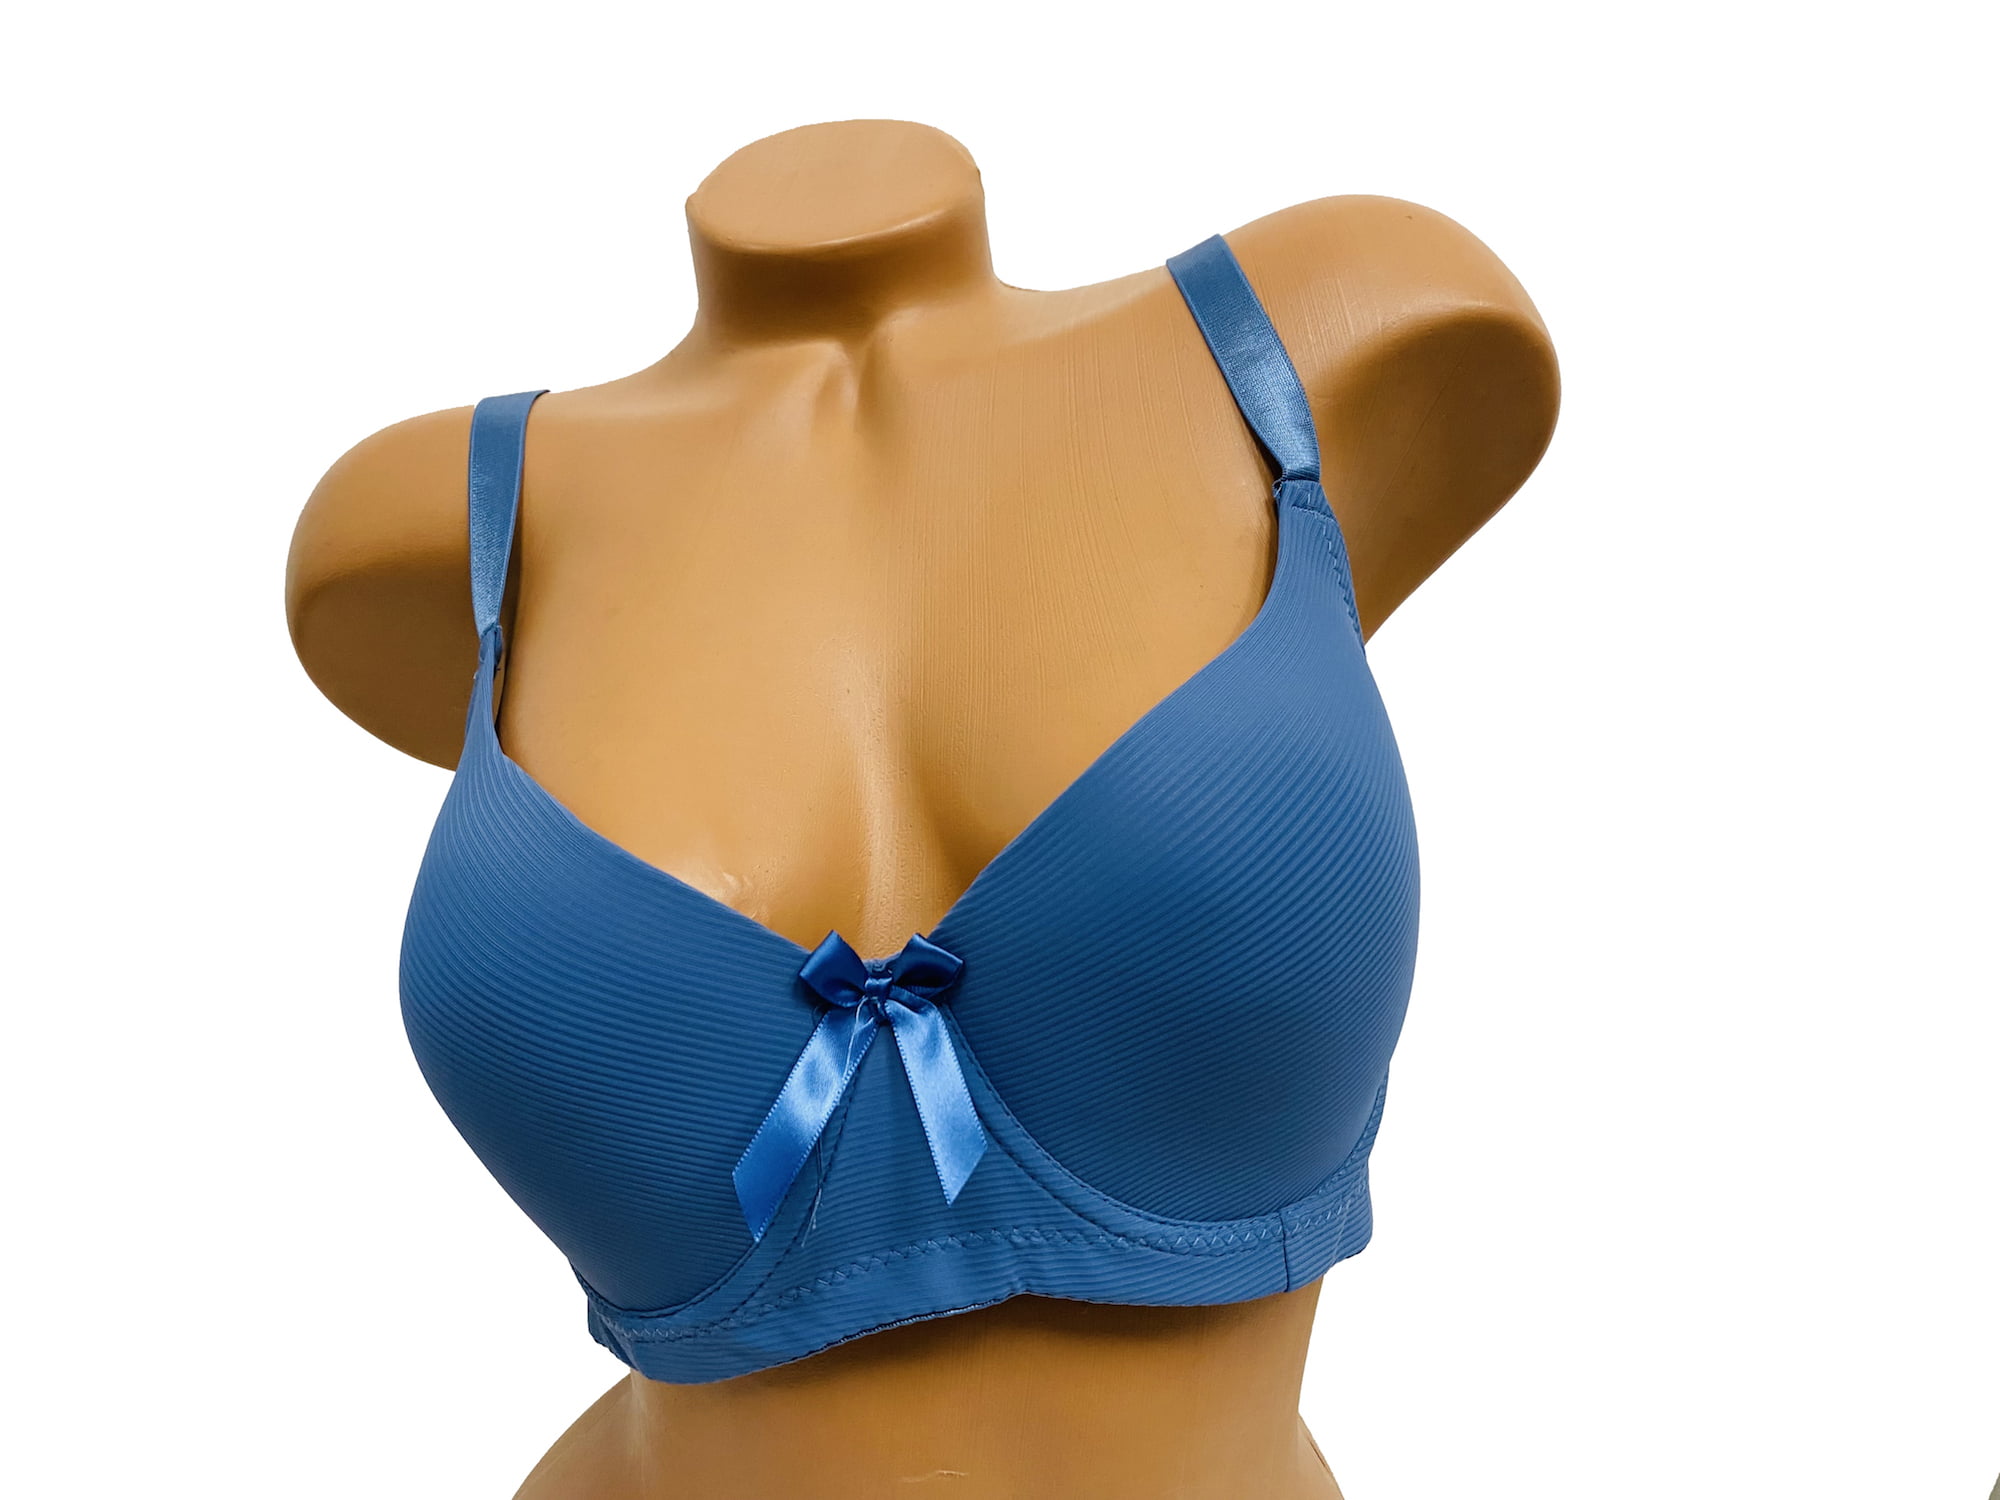 Women Bras 6 pack of T-shirt Bra B cup C cup D cup DD cup DDD cup 38C  (X9298) 